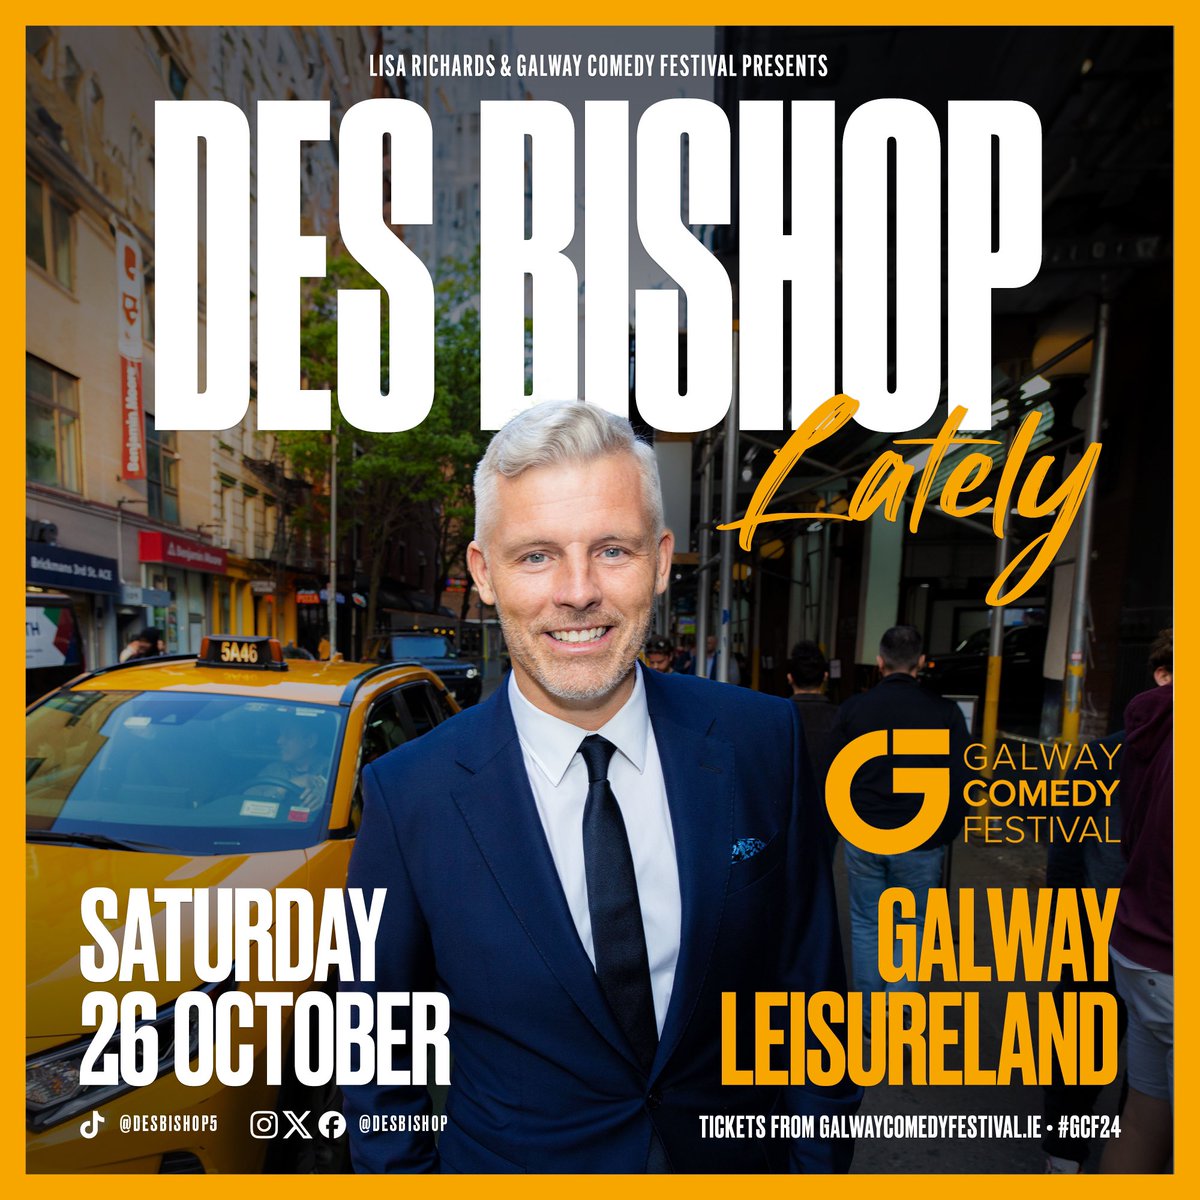 Good news! 🗞 Des Bishop is coming to #GCF24 on Sat 26 Oct with his new show: Lately Tickets on sale this Thursday 10am 🎟 galwaycomedyfestival.ie/comedians.html